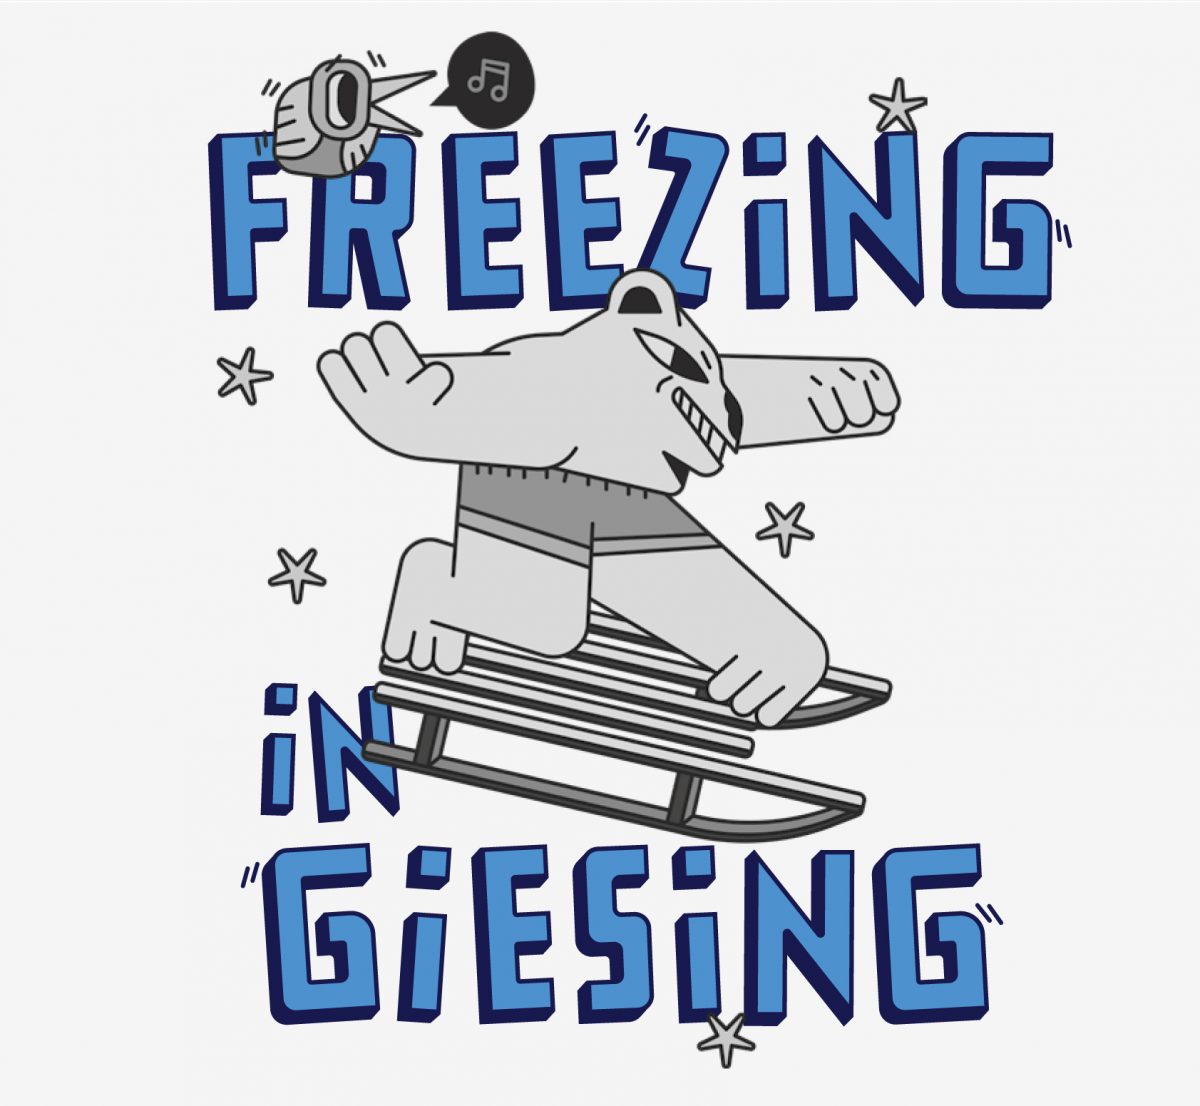 FREEZING IN GIESING - SAVE YOUR LOCAL UNDERGROUND